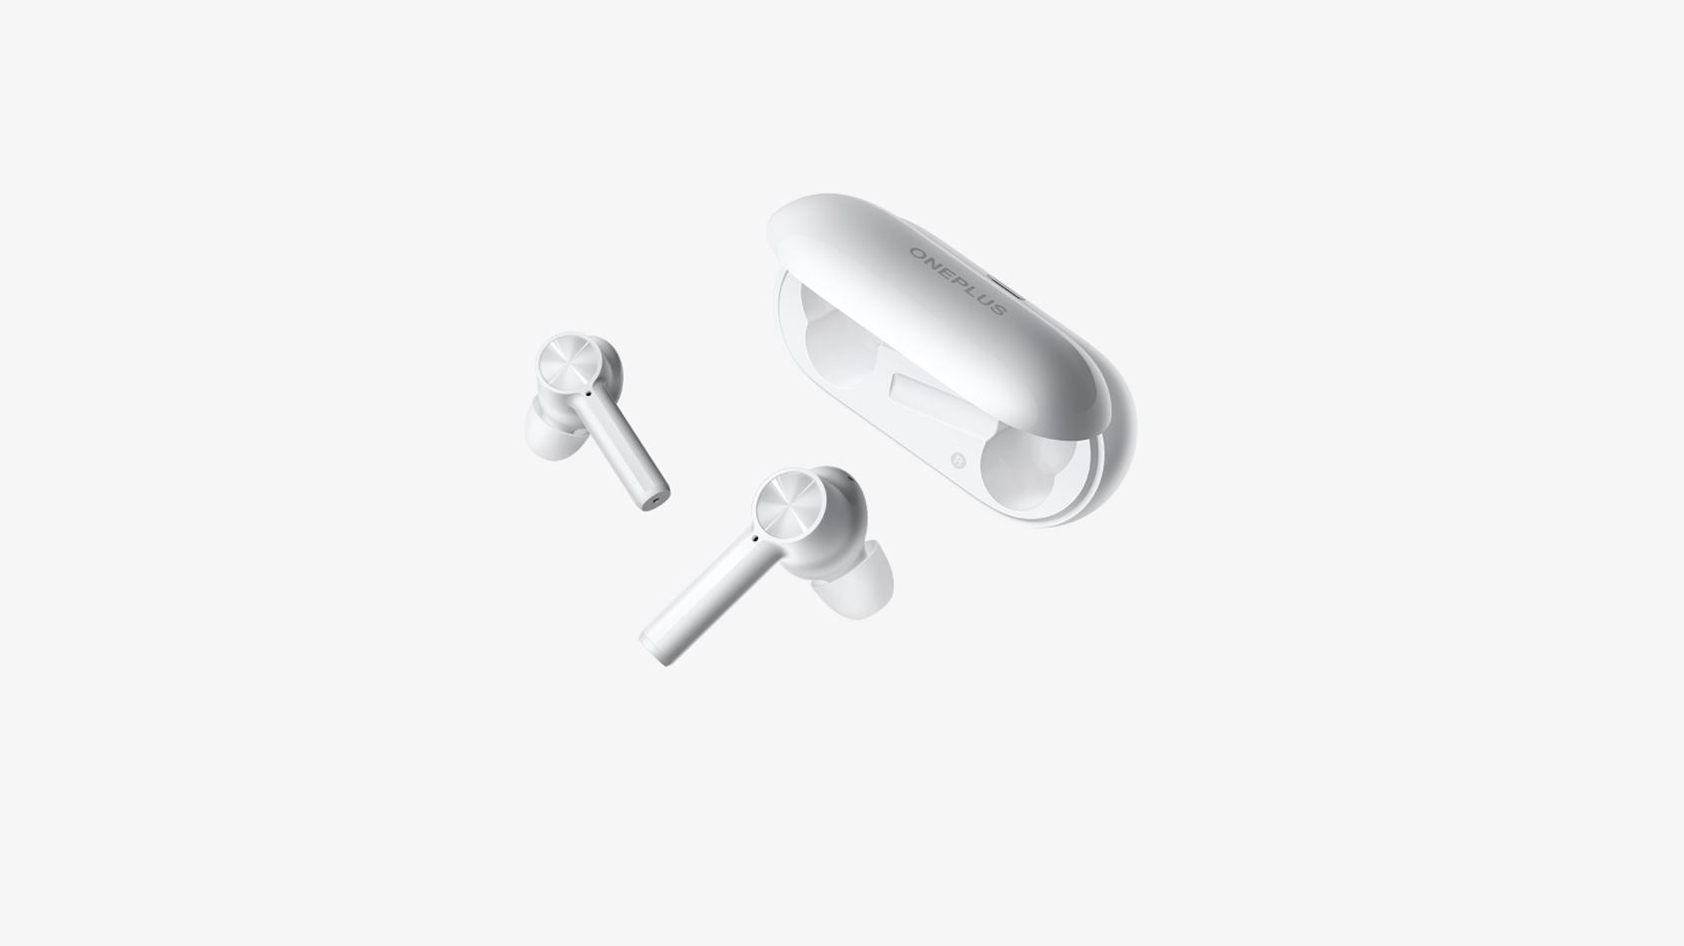 The OnePlus Buds Z in white against a gray background.